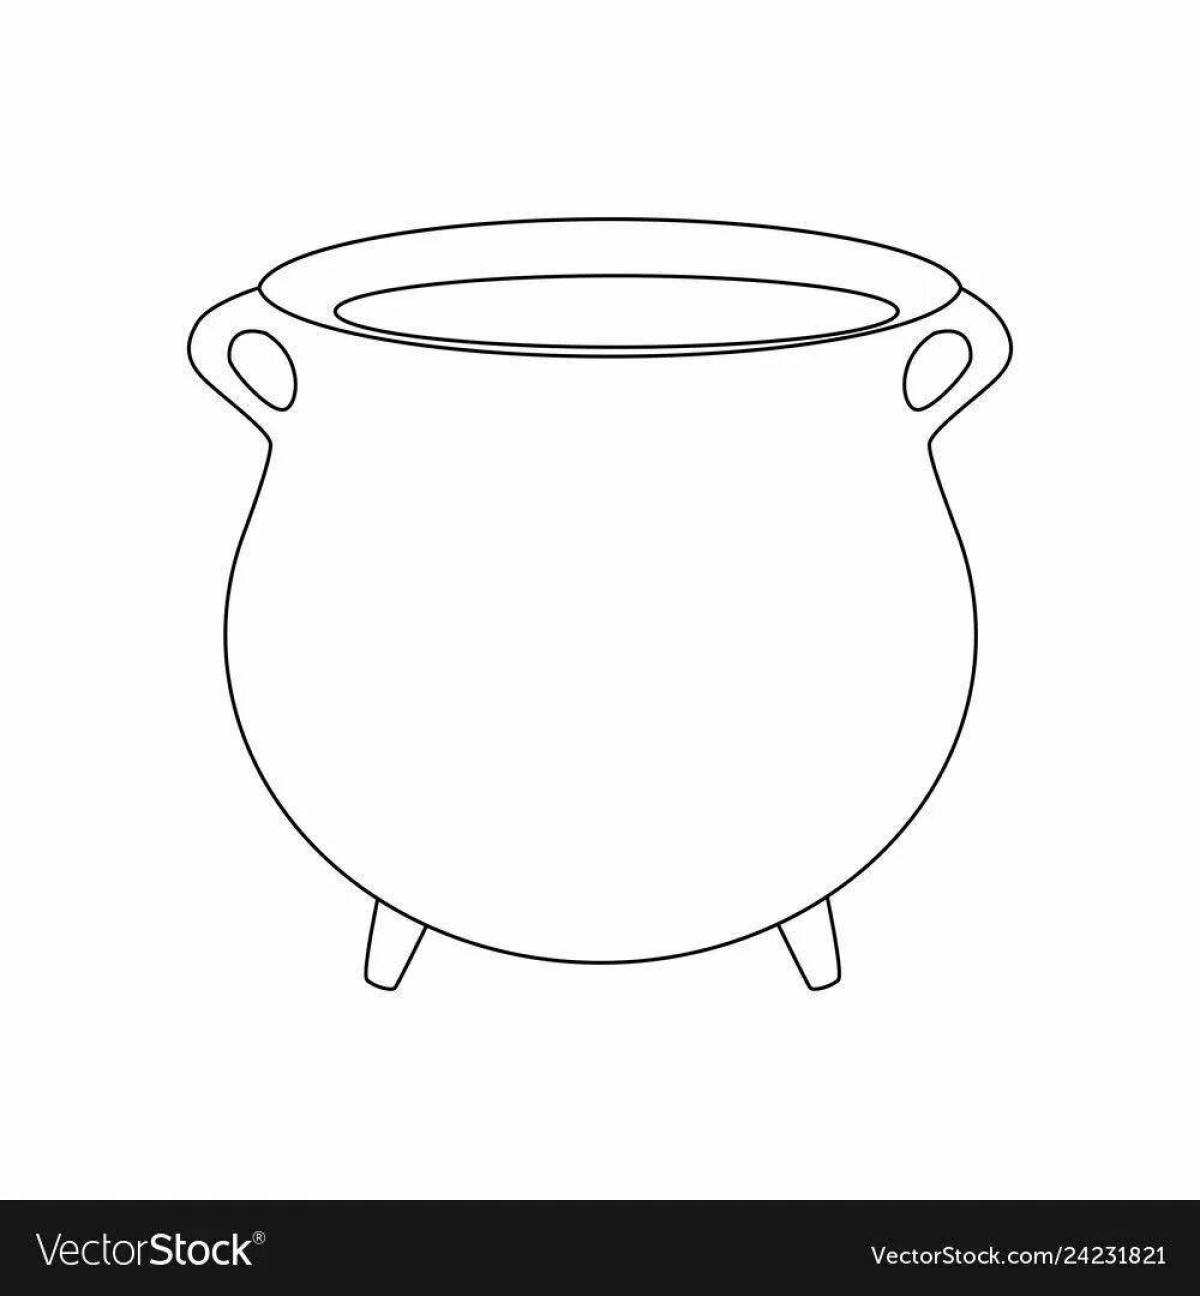 Humorous coloring of the cauldron